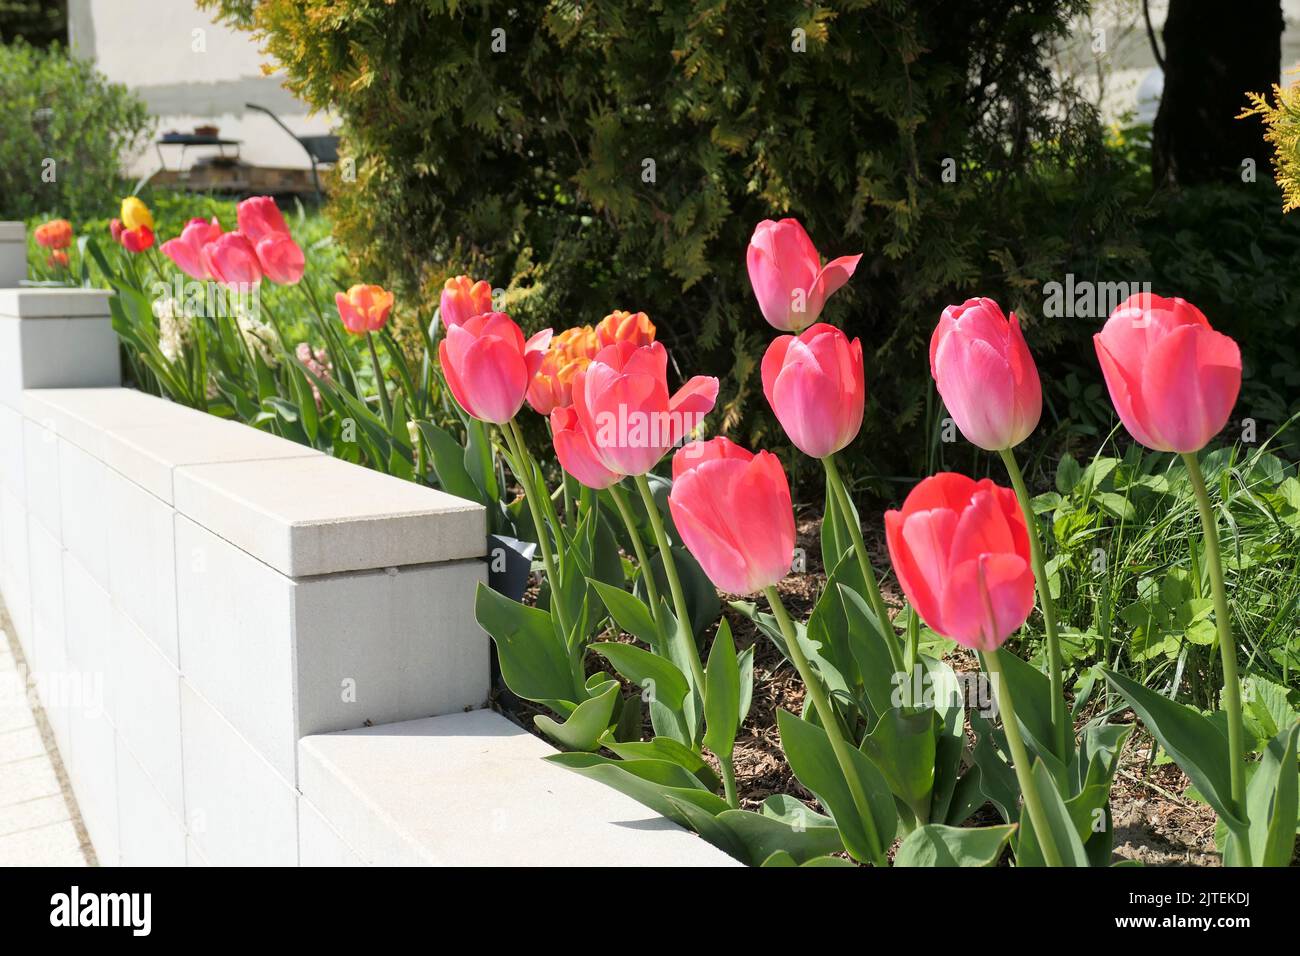 Tulips red flowers growing in the garden. Colorful spring flowers on flower bed by wall. Stock Photo